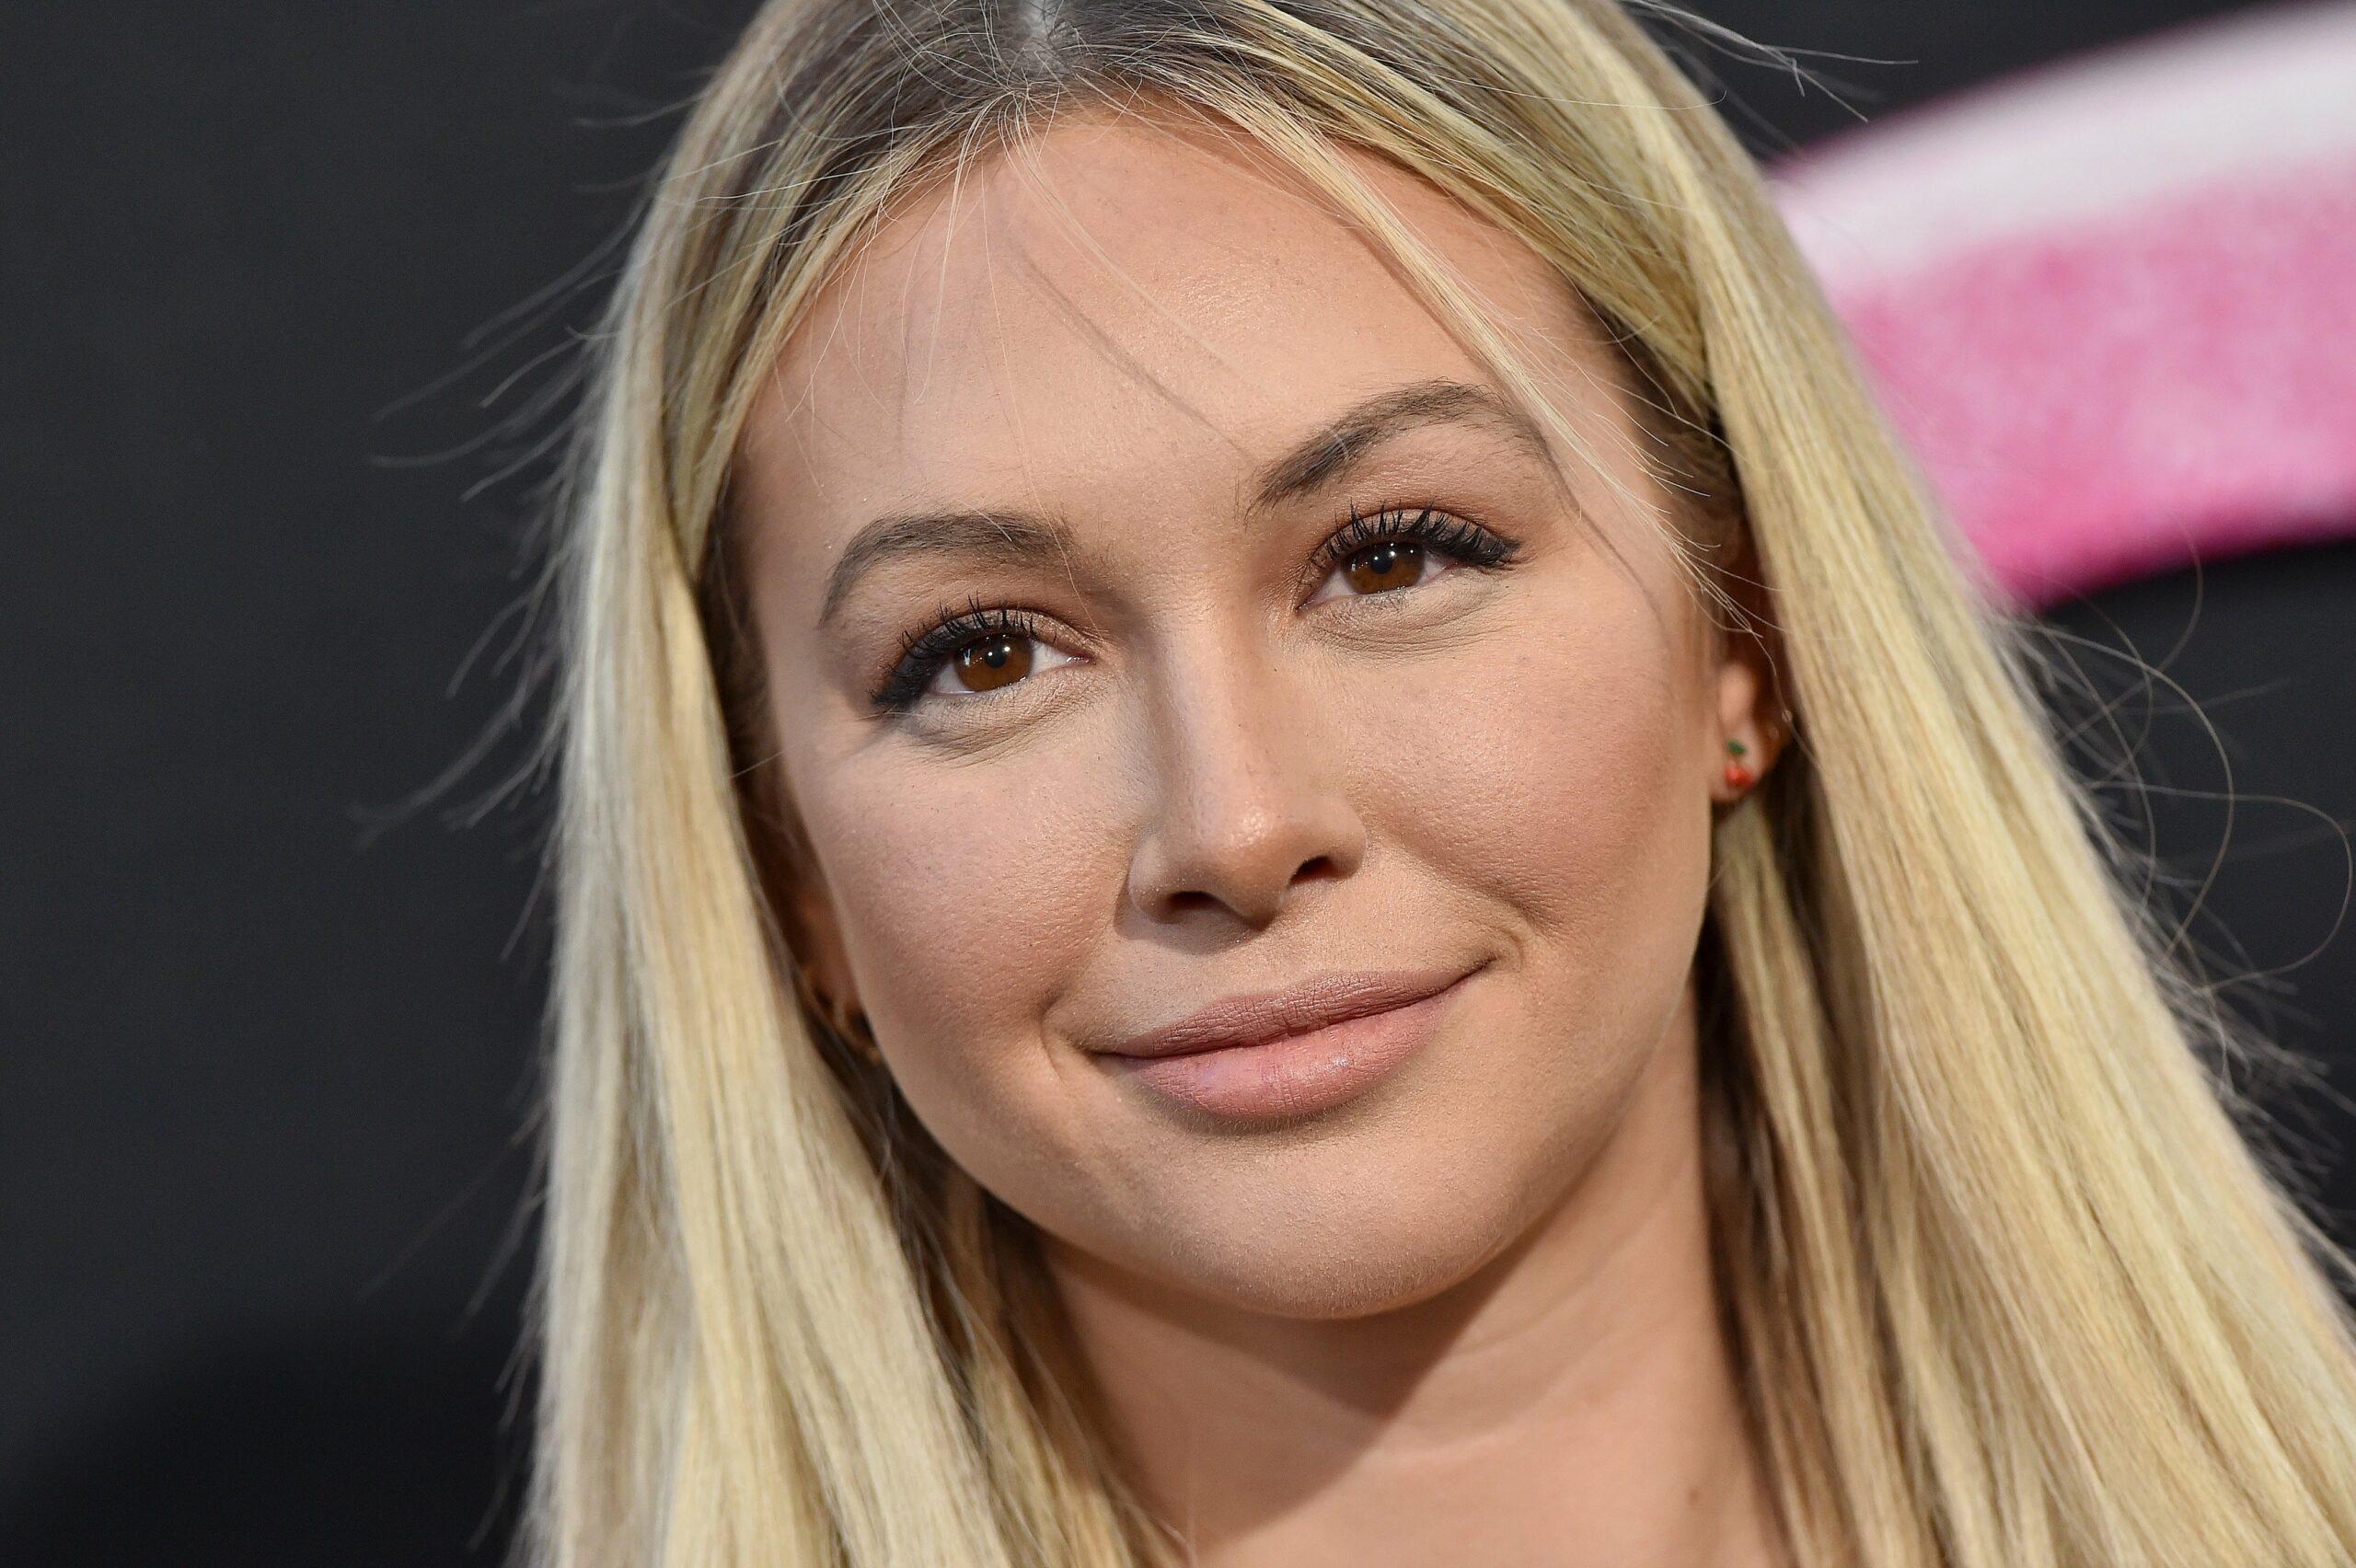 Corinne Olympios at Los Angeles Premiere of "Tully". 